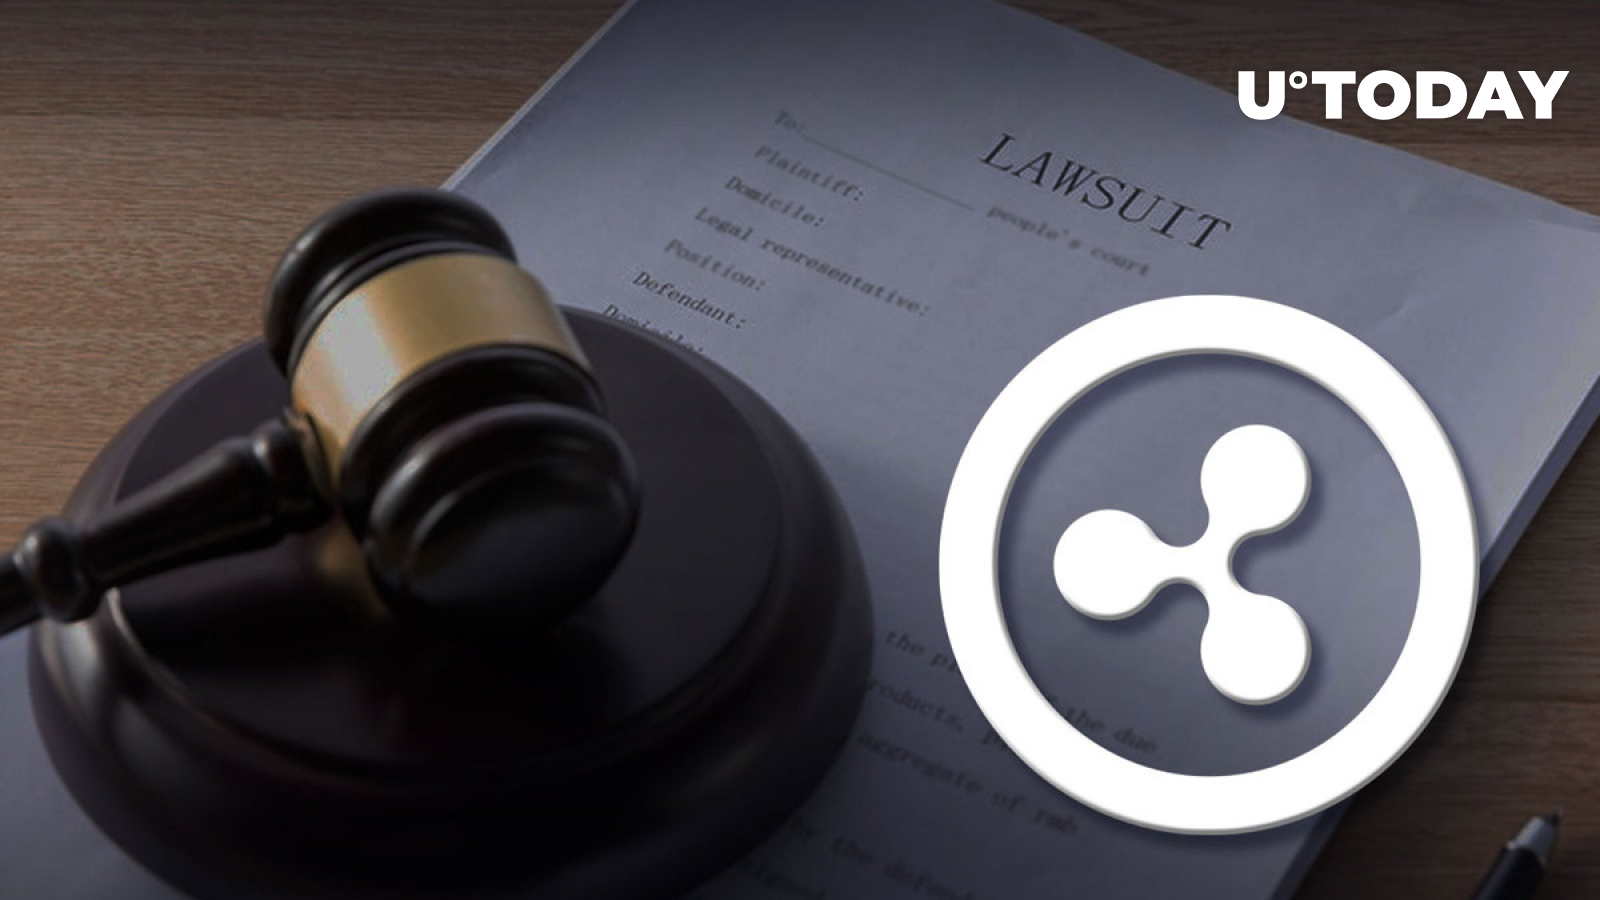 Ripple Lawsuit: Here Is the Key Point of SEC’s Argument per James K. Filan